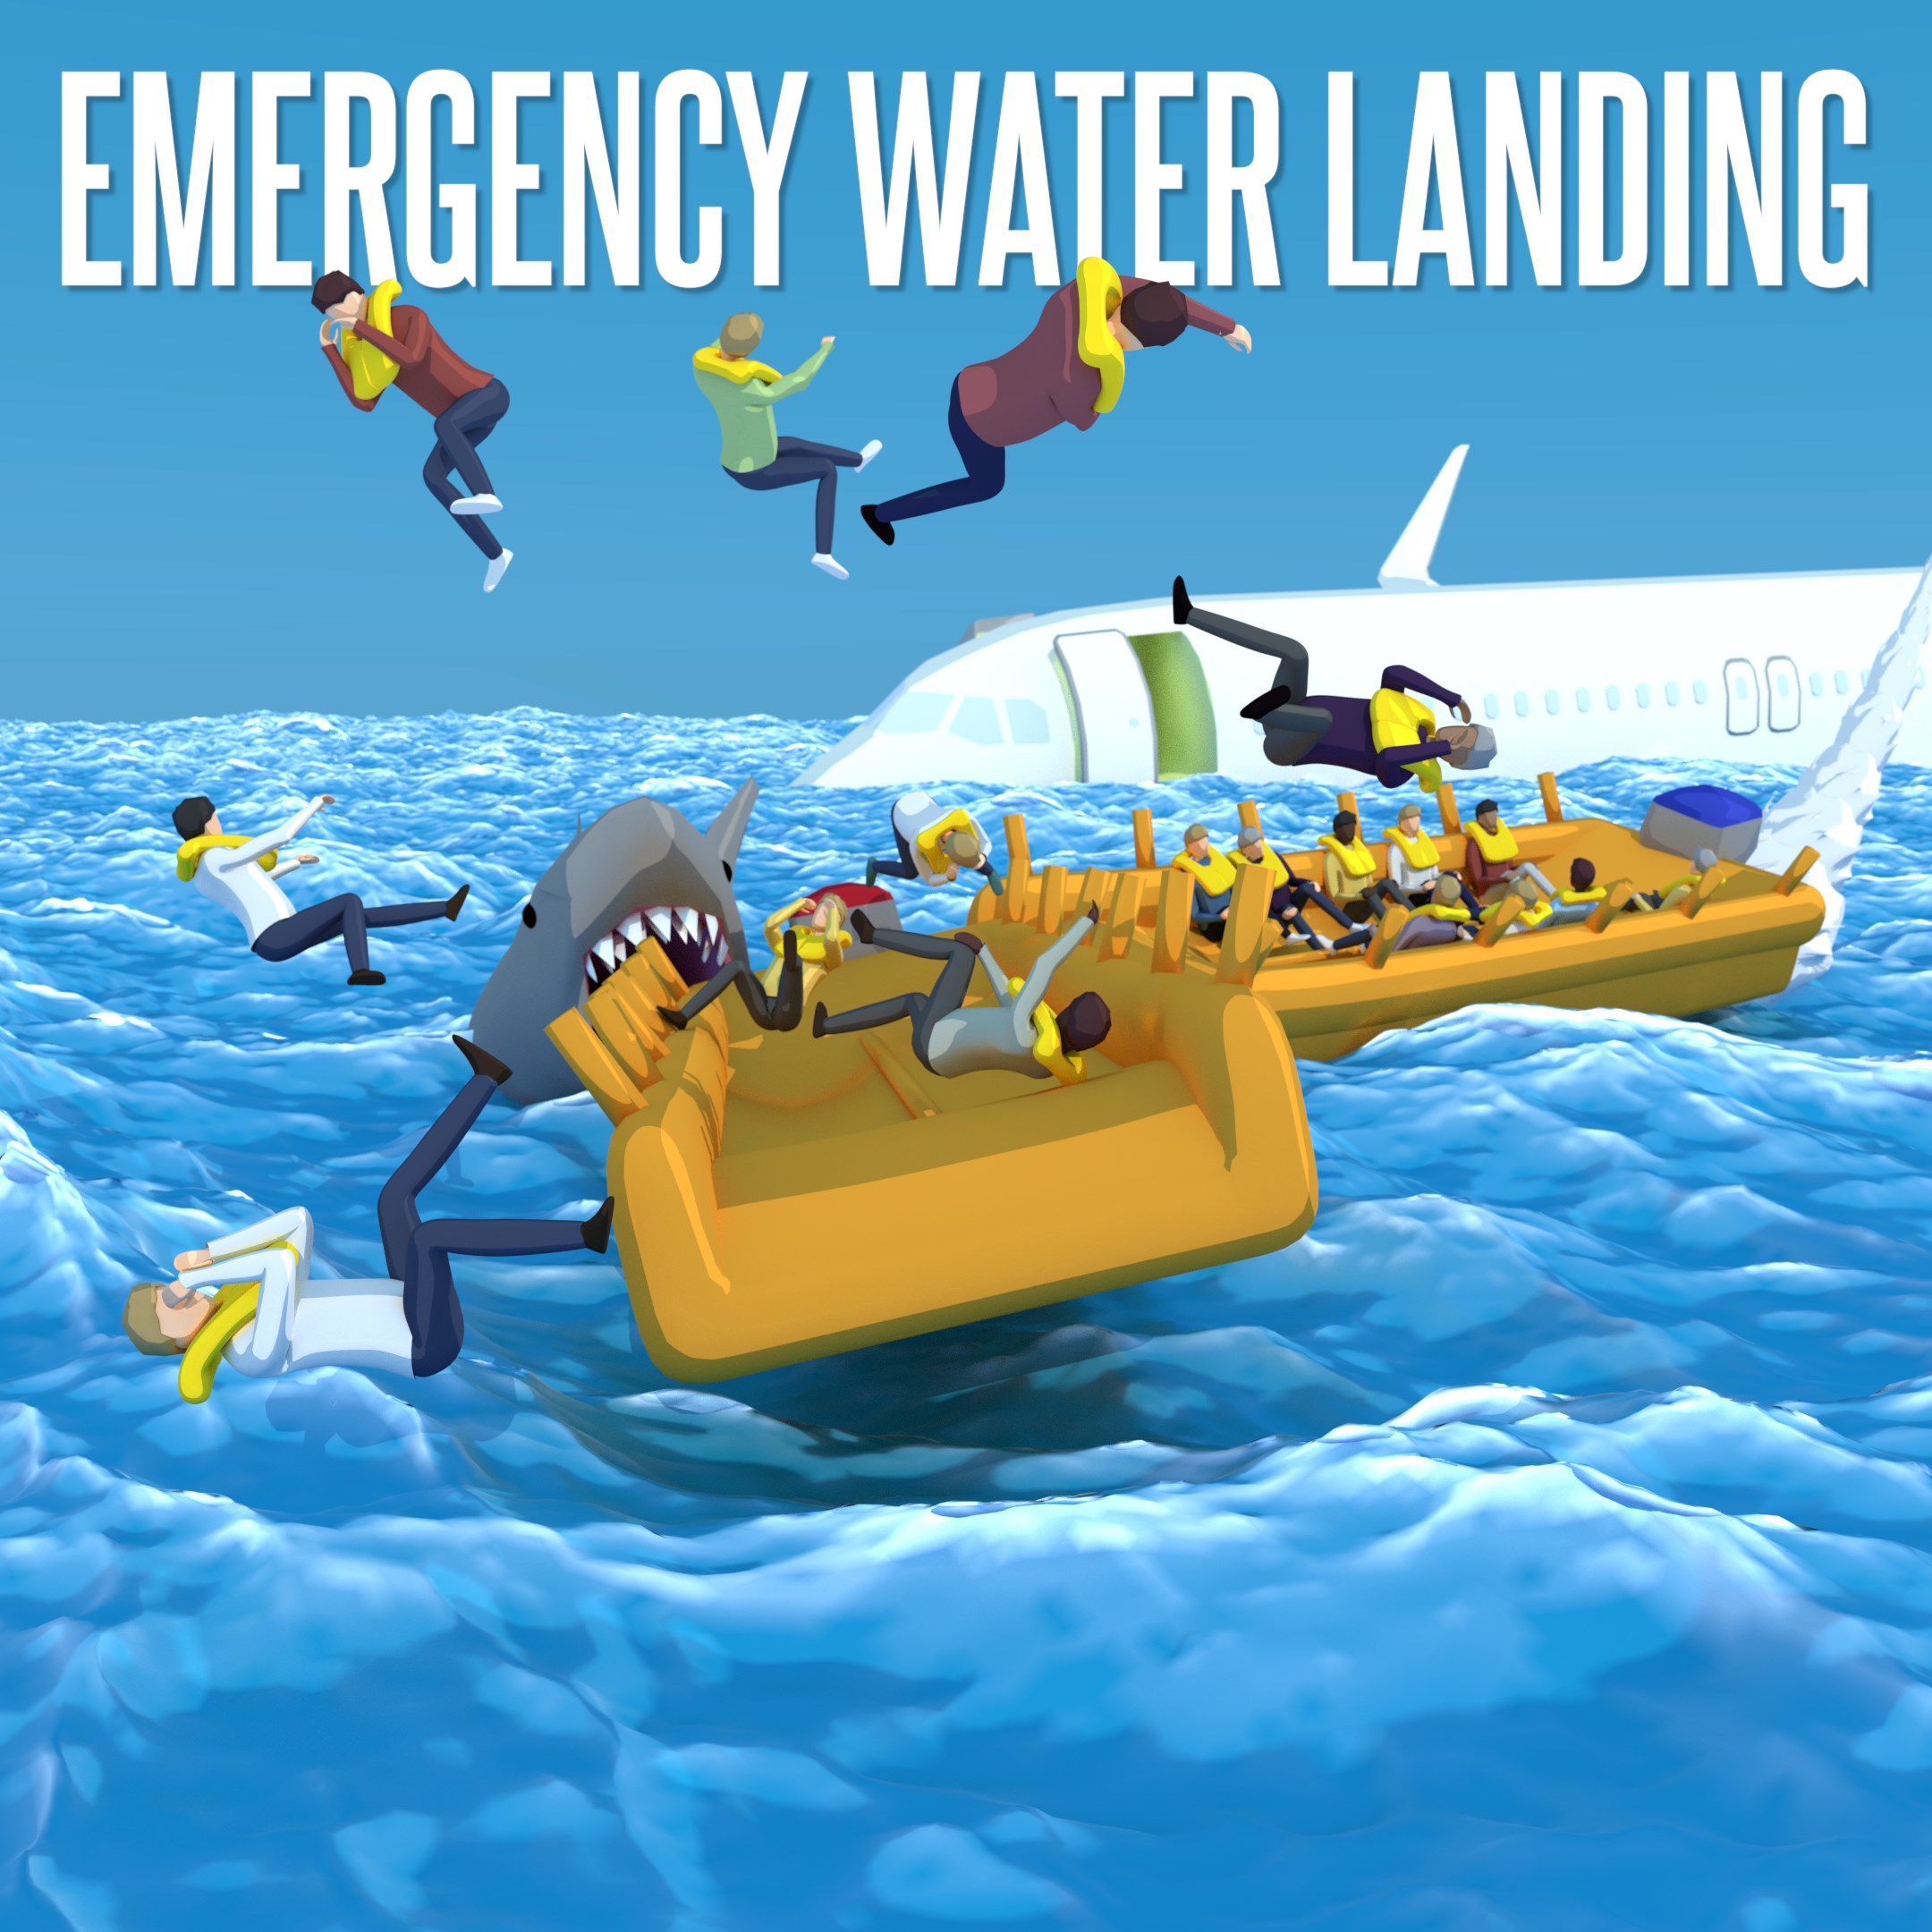 Emergency Water Landing technical specifications for computer